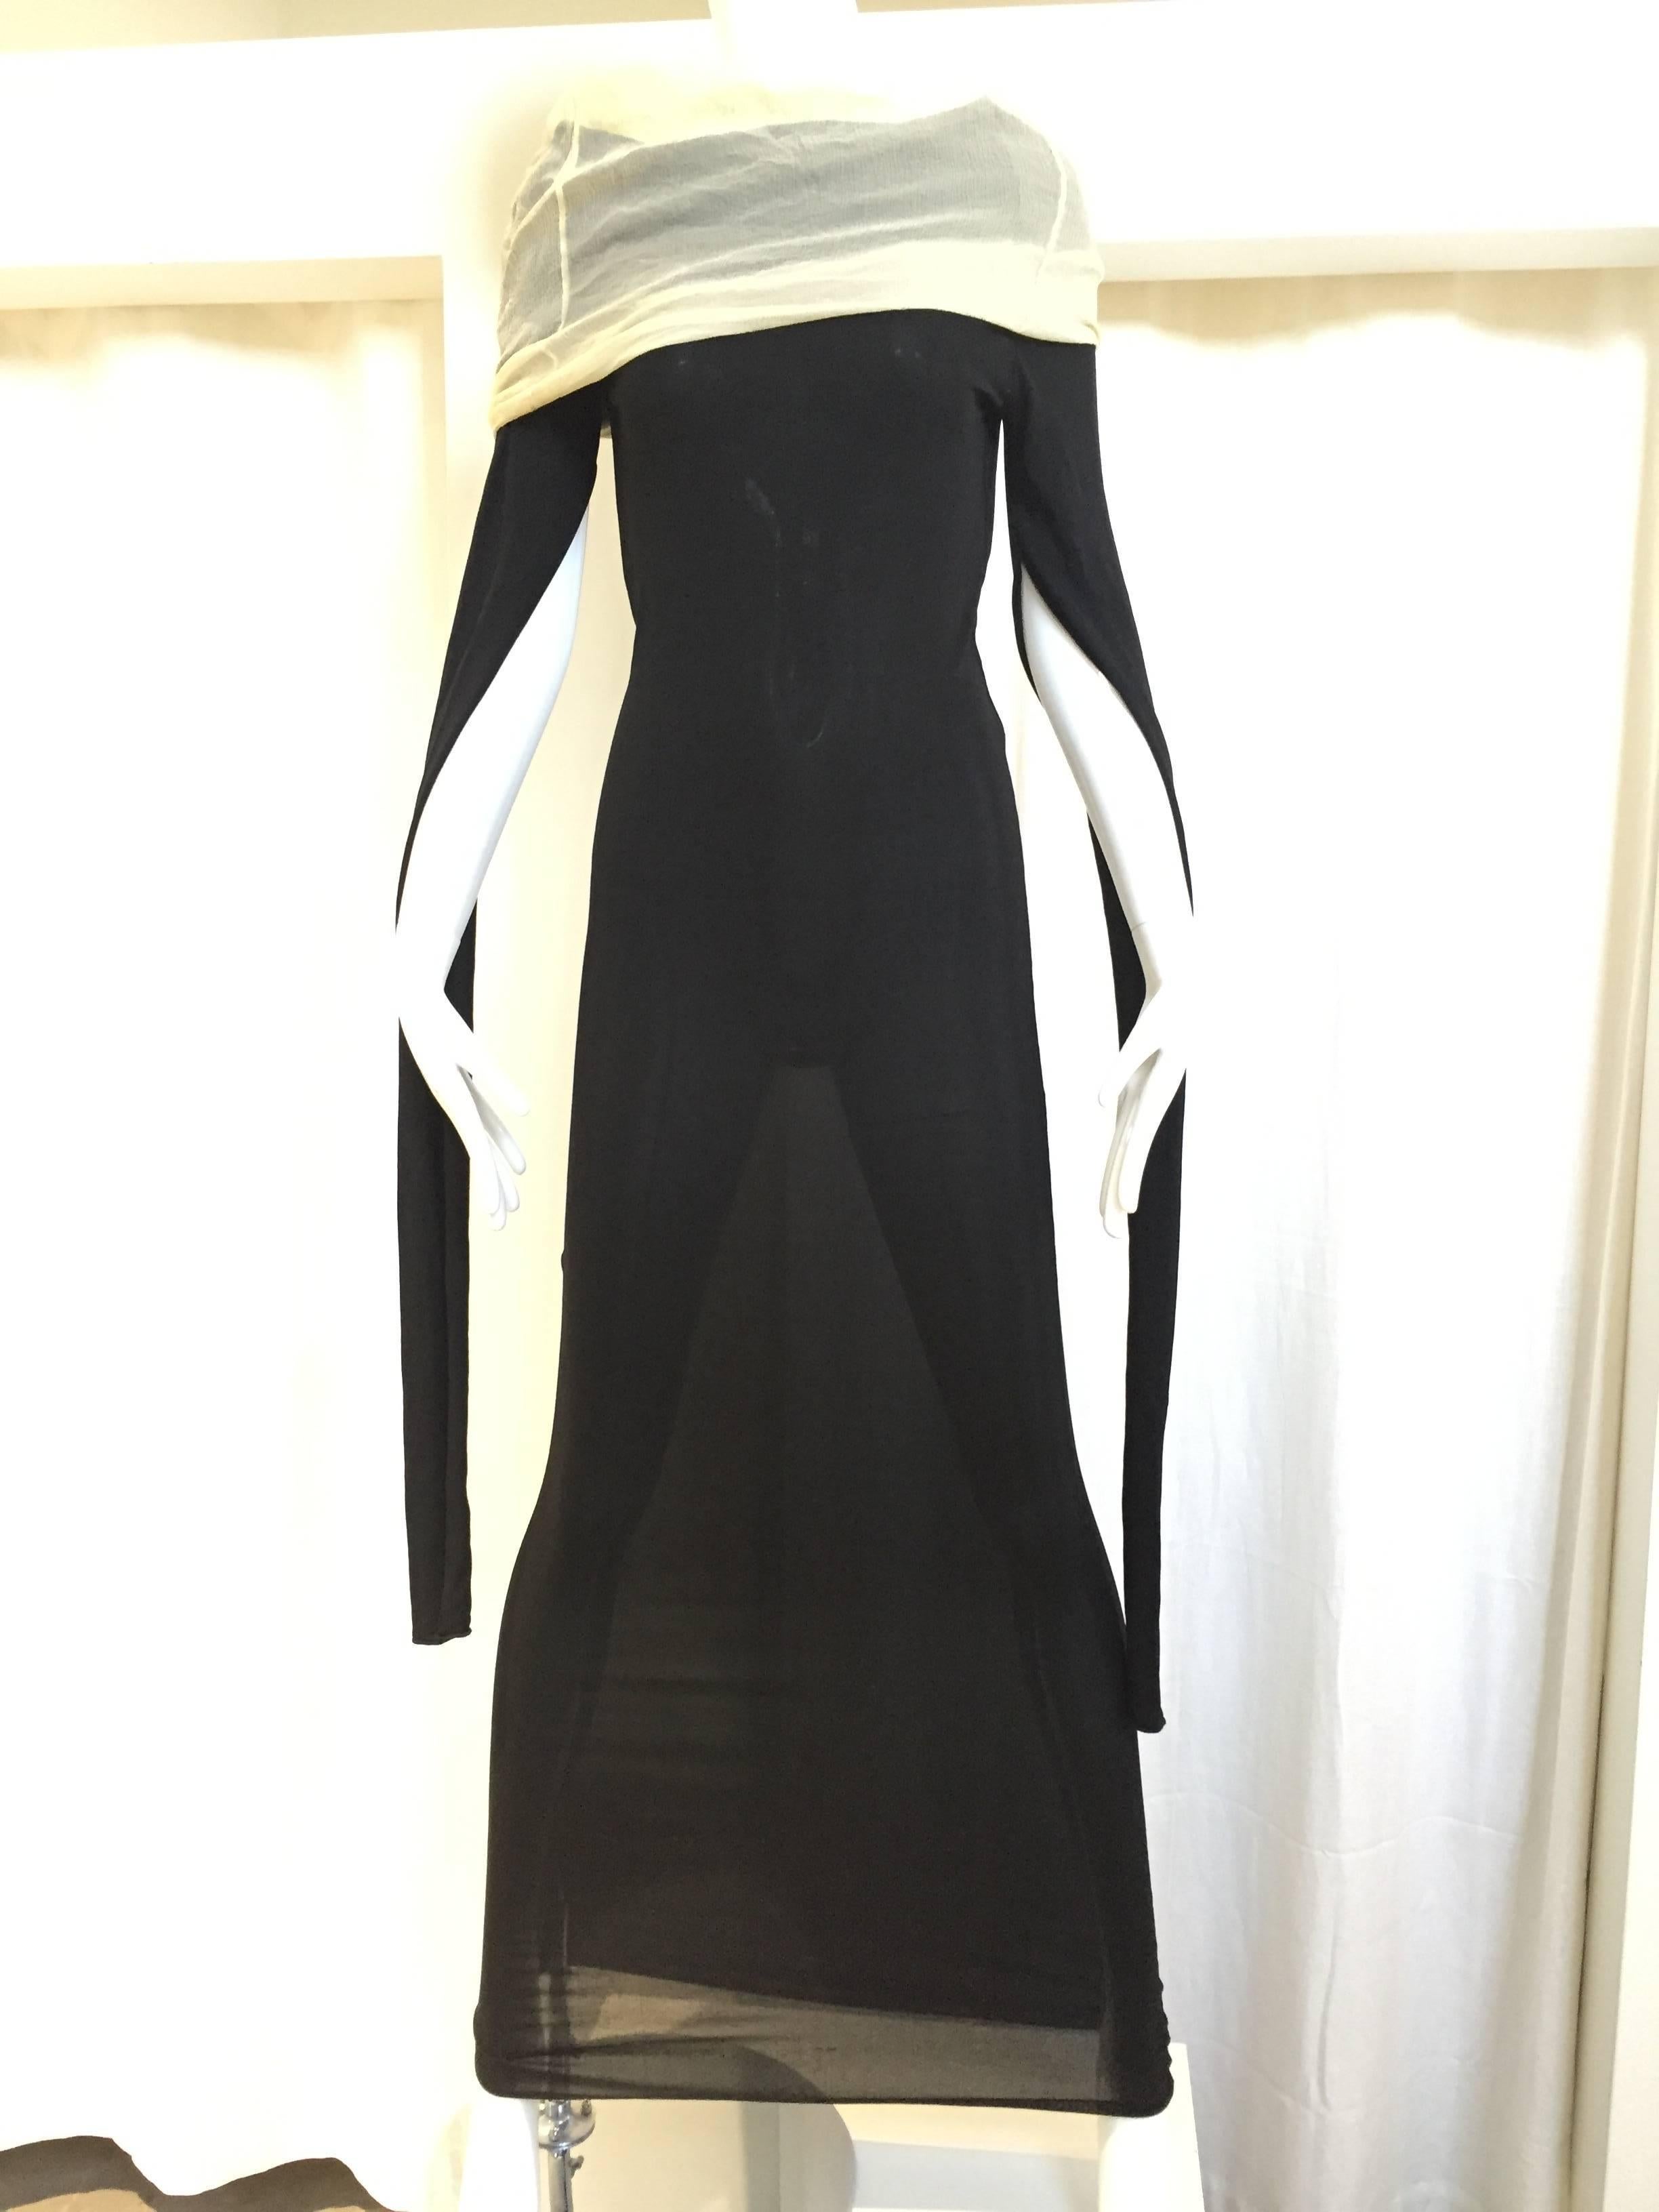 Vintage Jean Paul Gaultier black jersey knit dress with long sleeve and exaggerated collar.
 Size: 4/6 fabric is stretch. Fit small to medium.